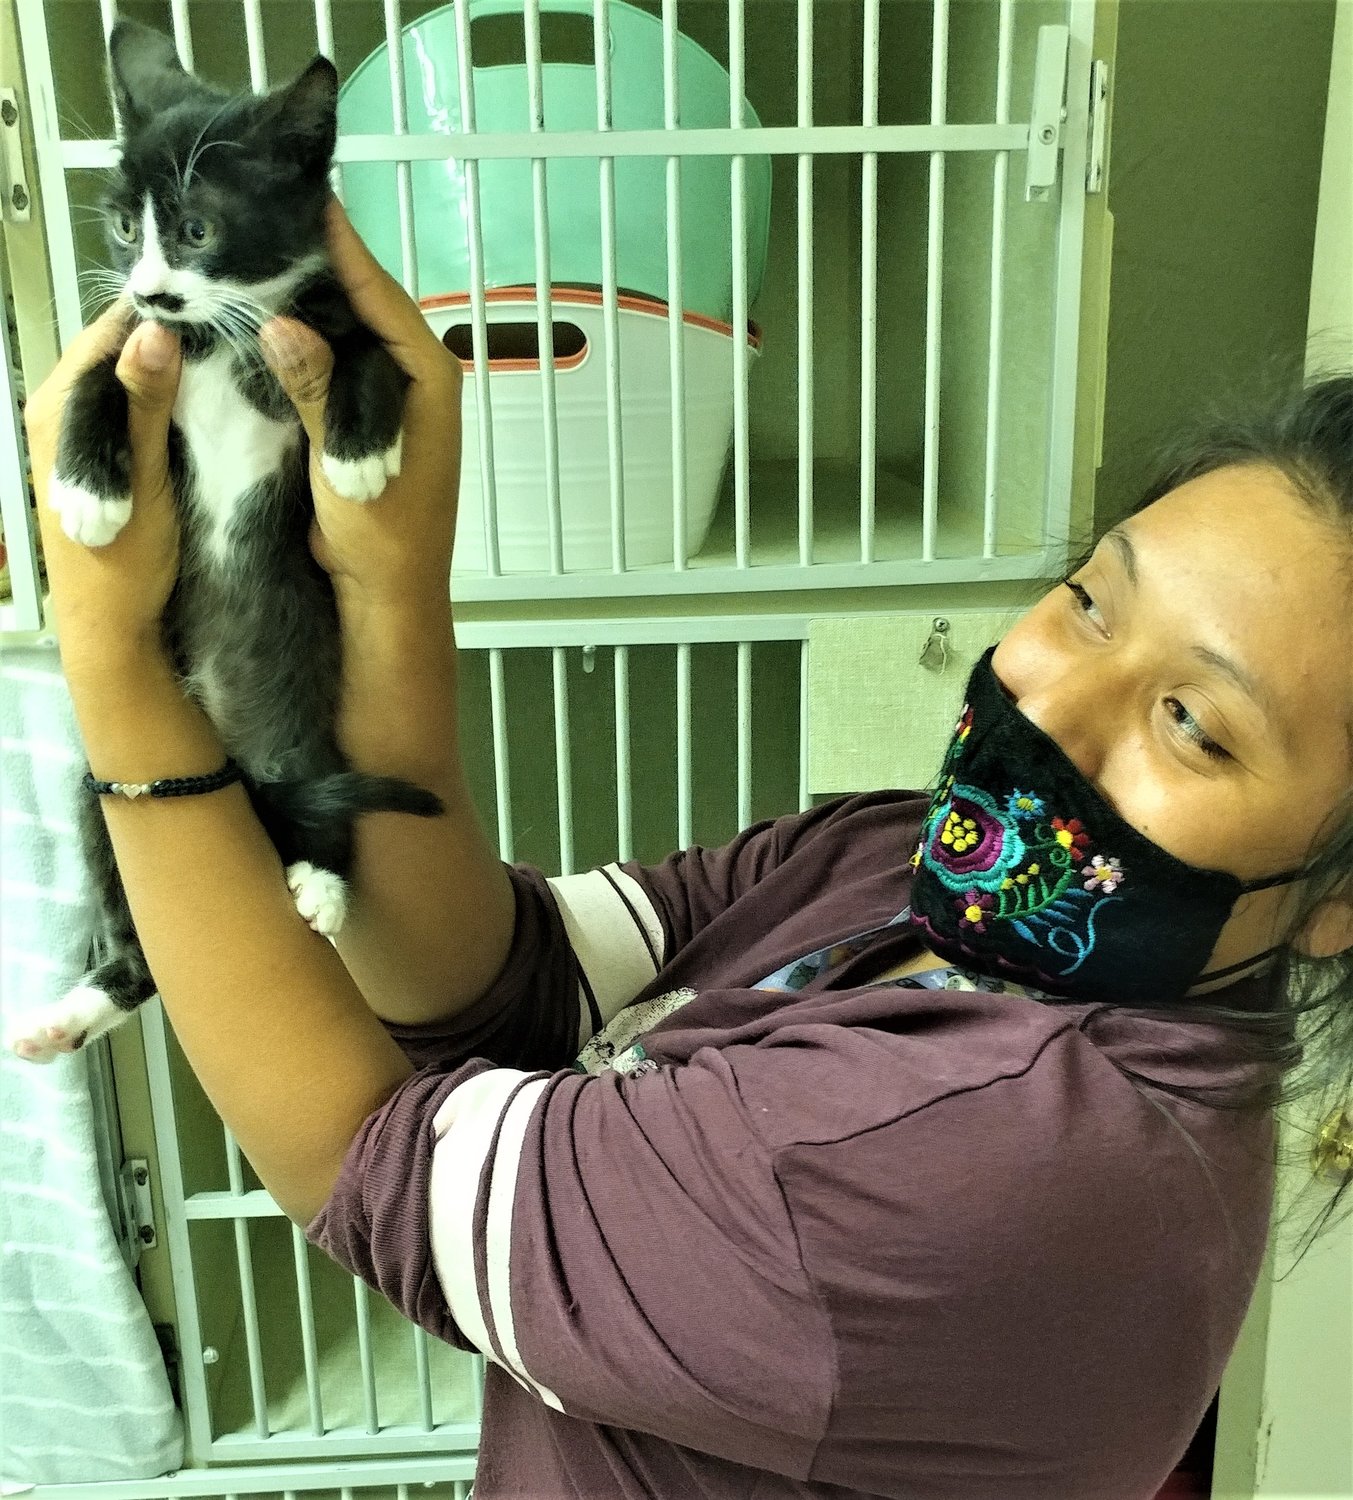 Stashy the kitten with ACTion Programs for Animals caregiver Jessica Cervantes. Check with APA to see if he’s stiff waiting to be adopted. If not, there are many other loveable dogs and cats just waiting to be taken home.